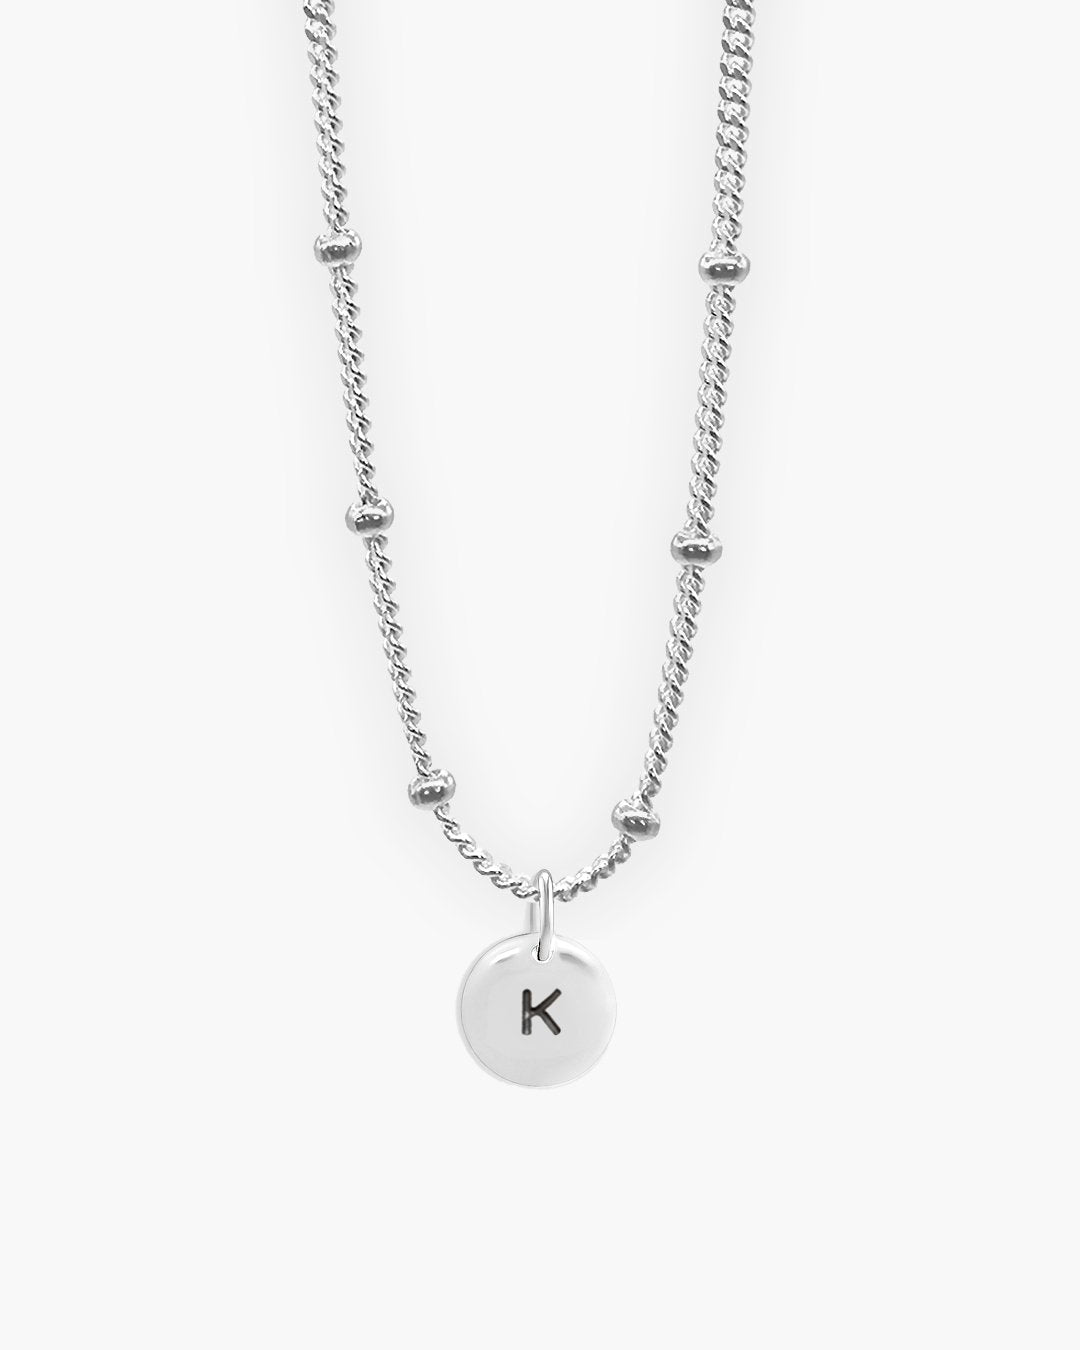 Silver Round Love Letter K Necklace